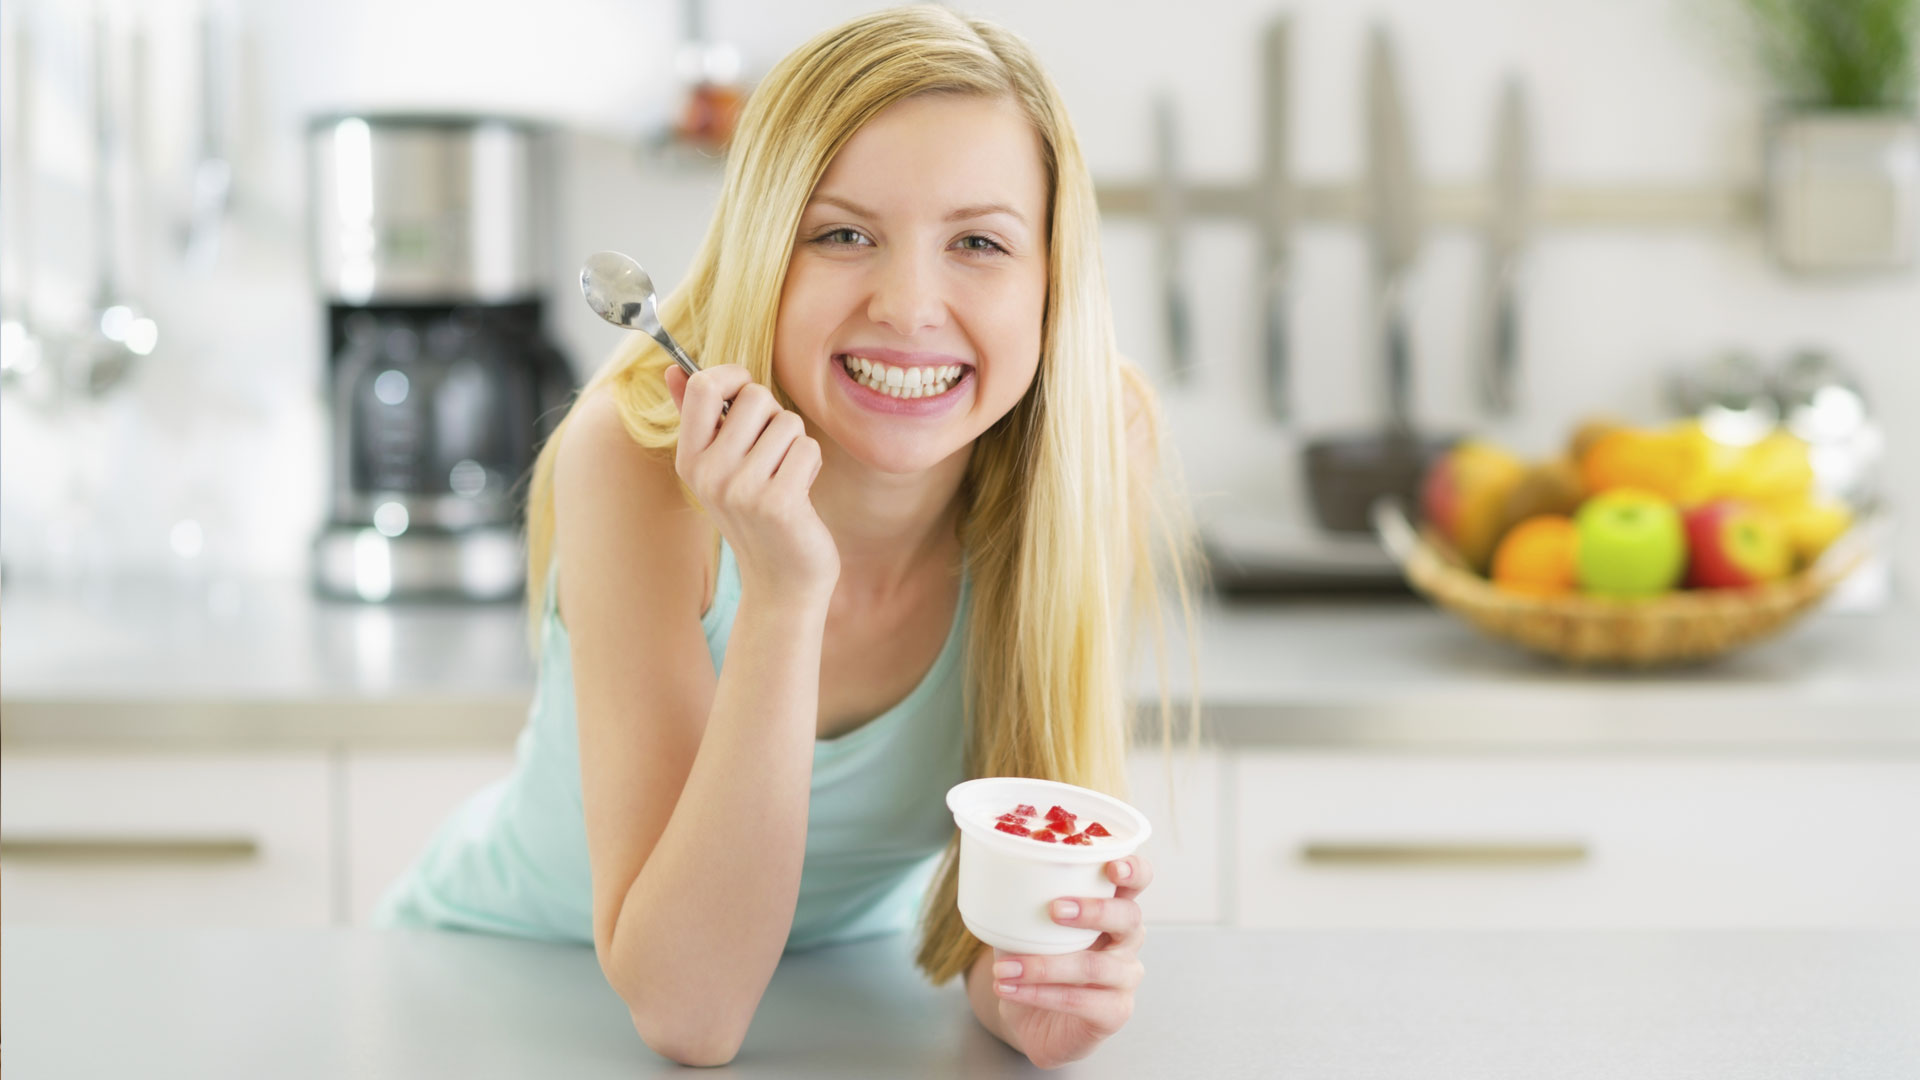 10 Benefits Of Healthy Eating Habits For Women!